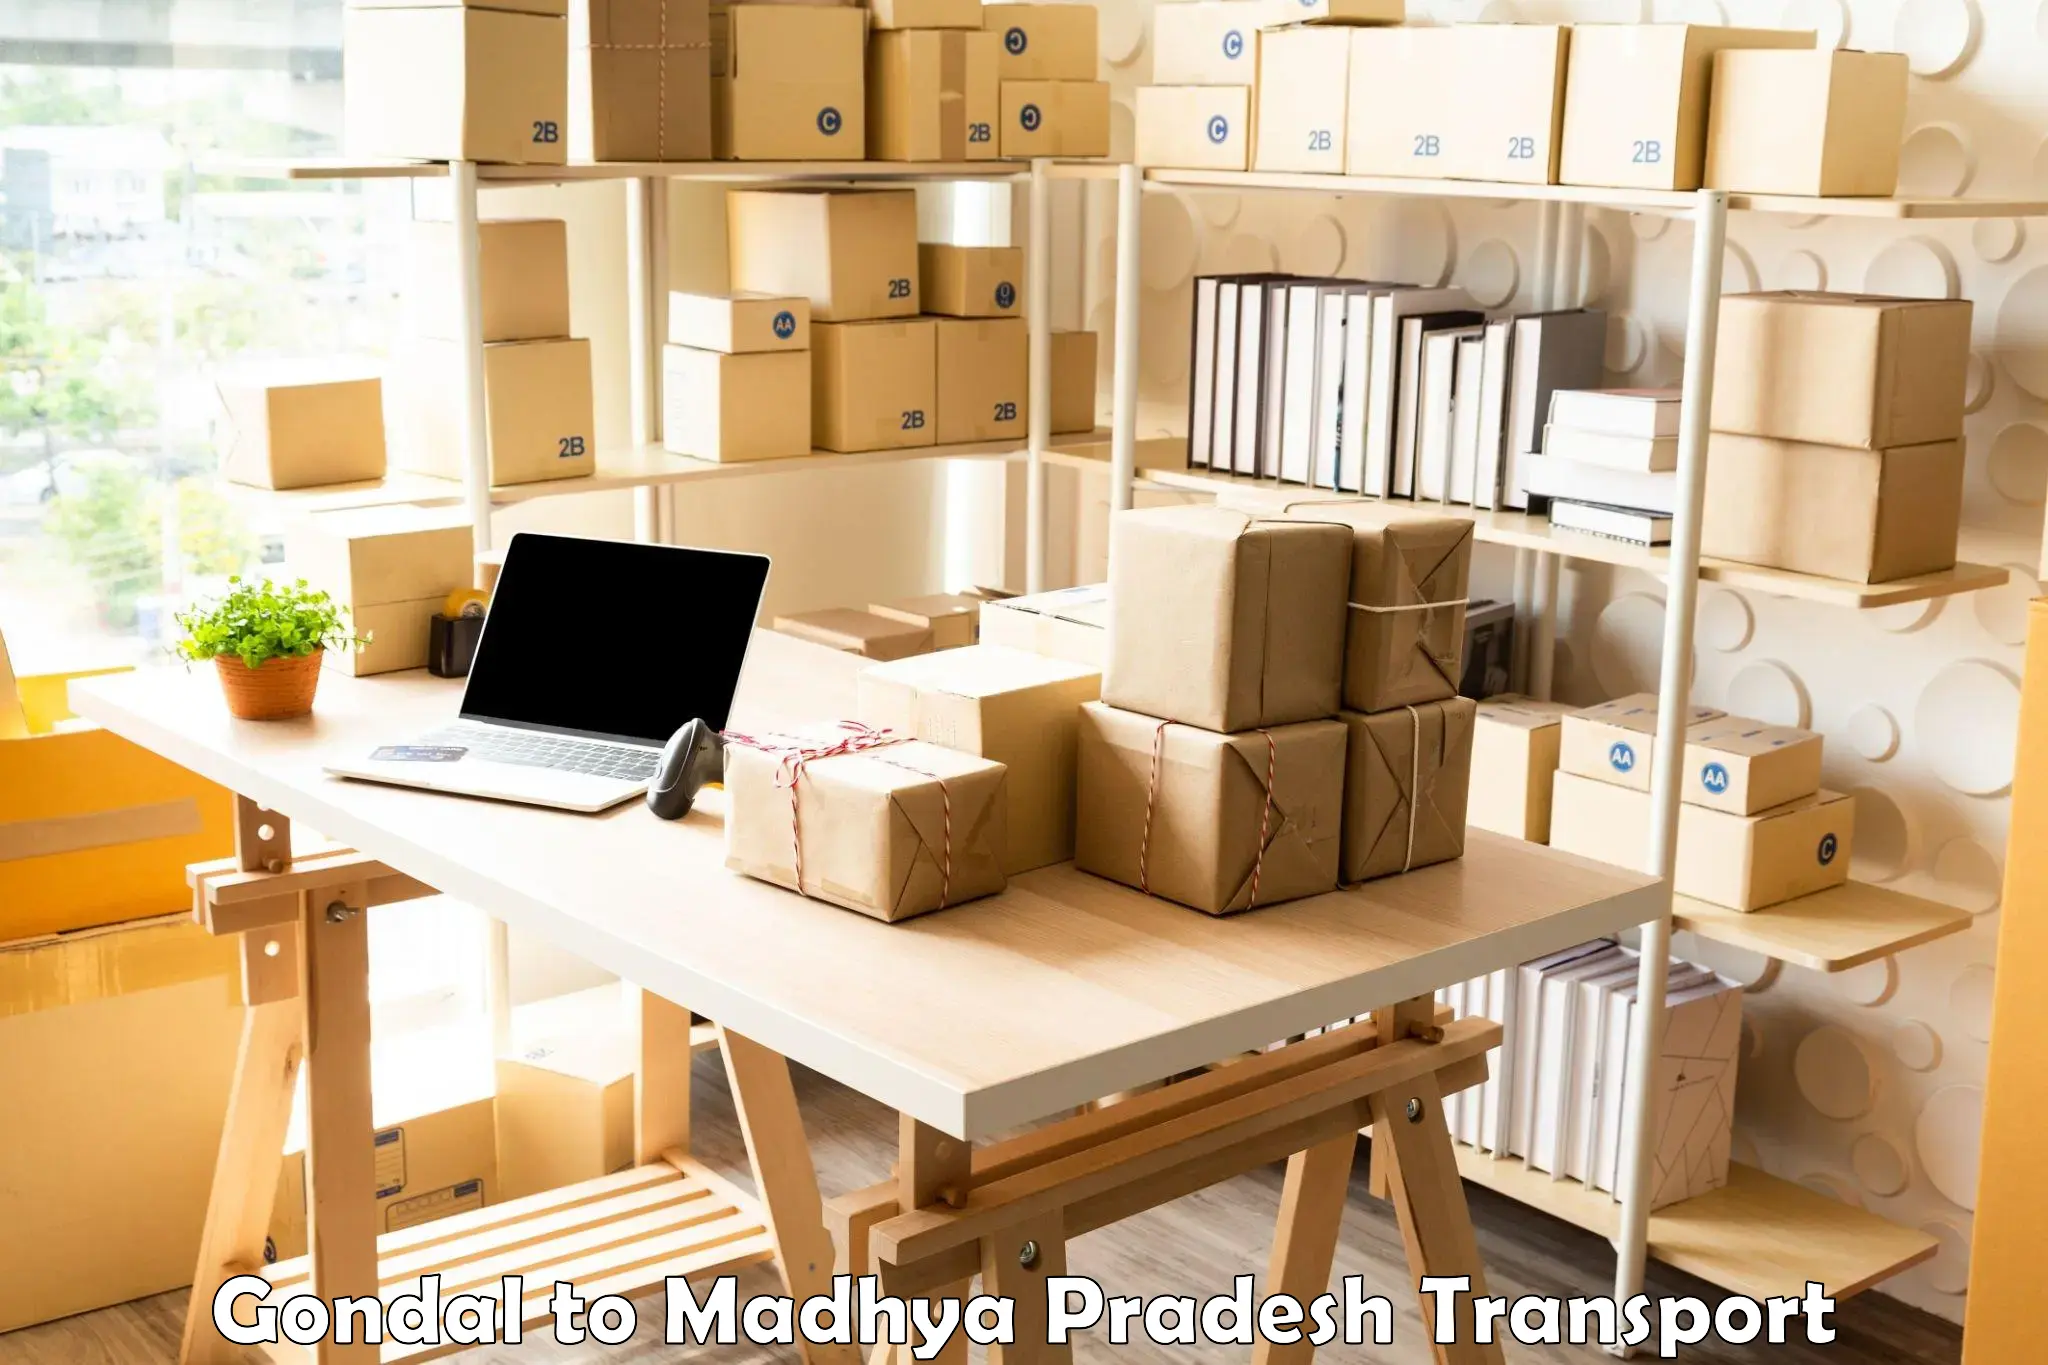 Package delivery services Gondal to Rampur Baghelan